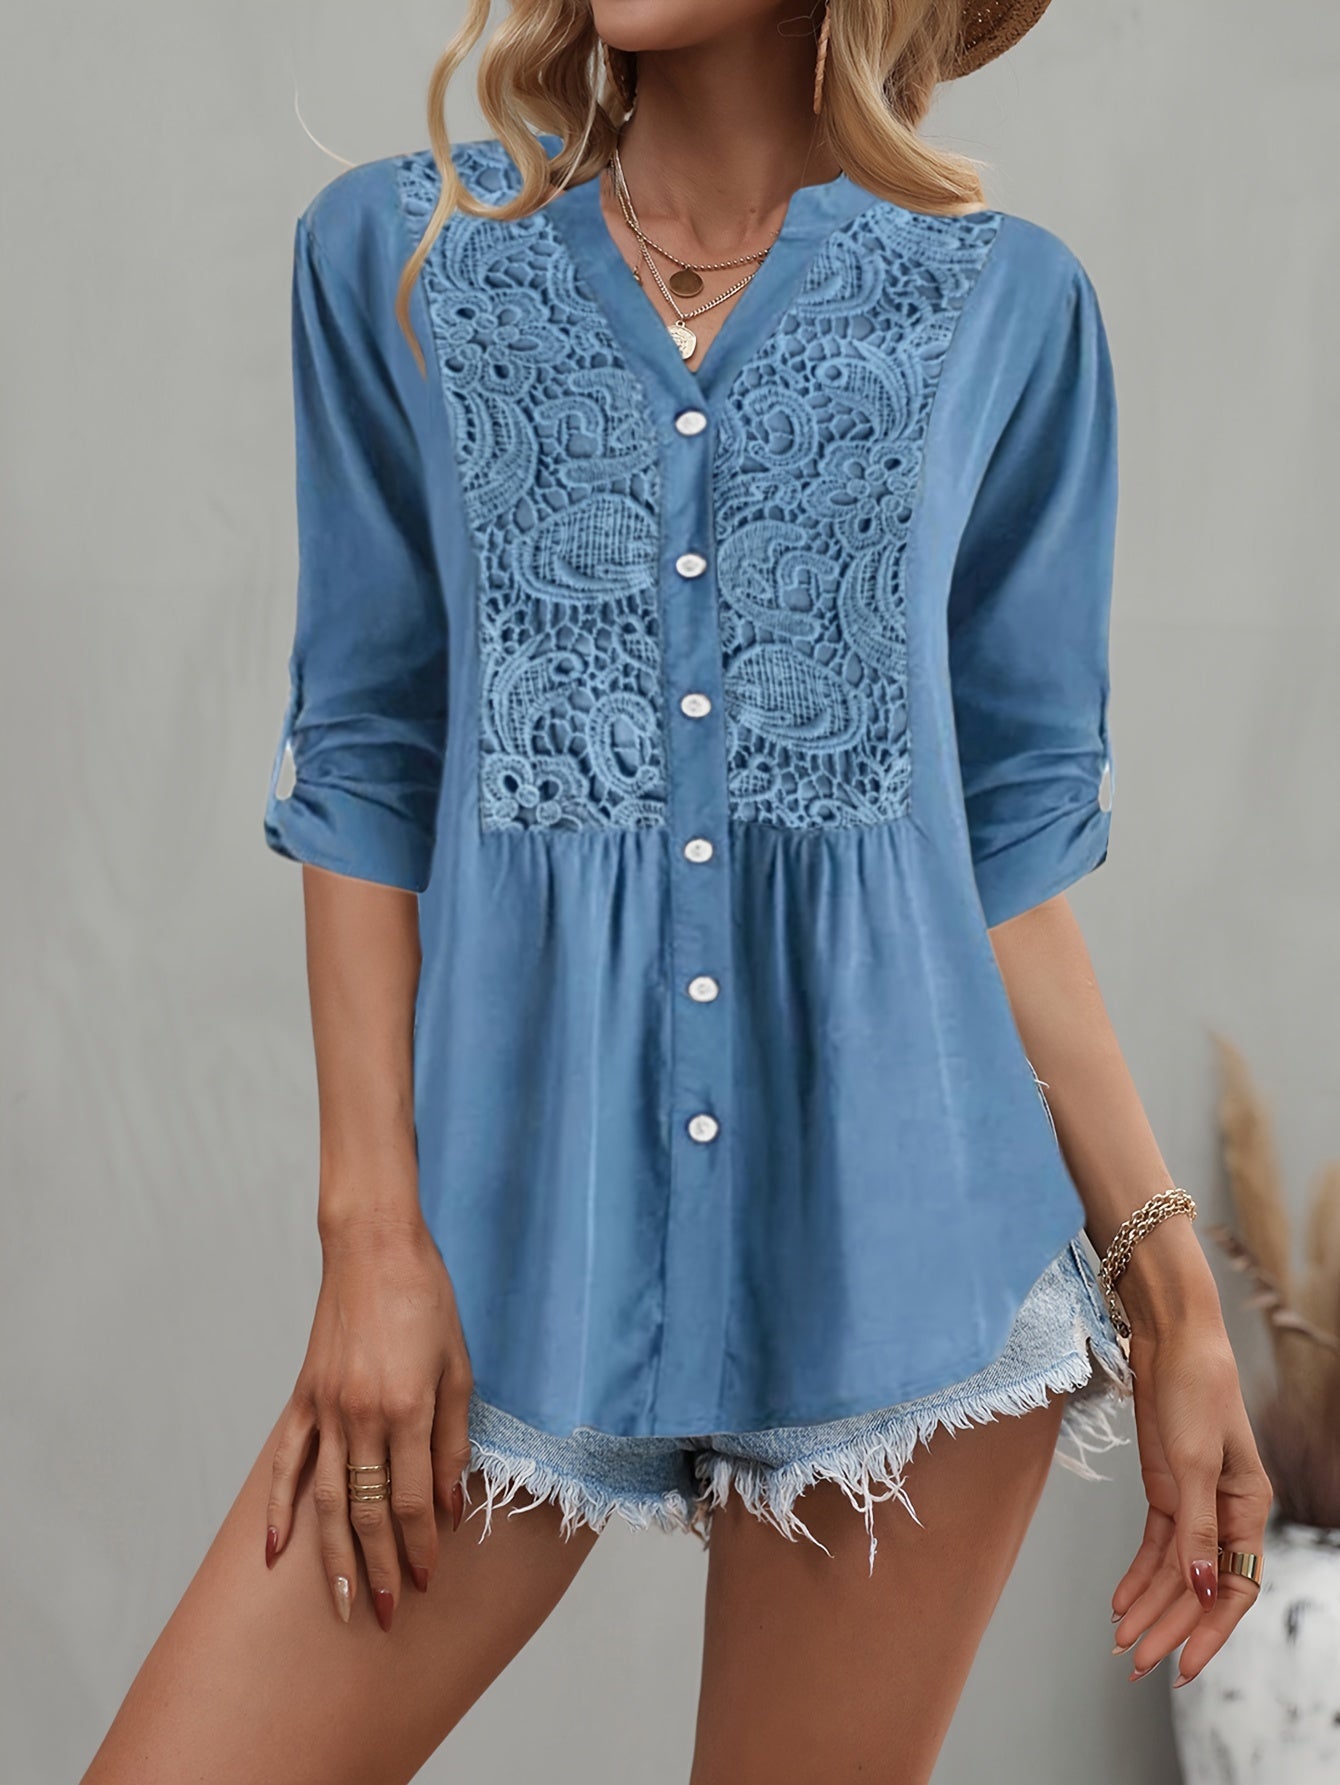 Vintage Lace Splicing Button Front Blouse - Half Sleeve Notched Neck Top